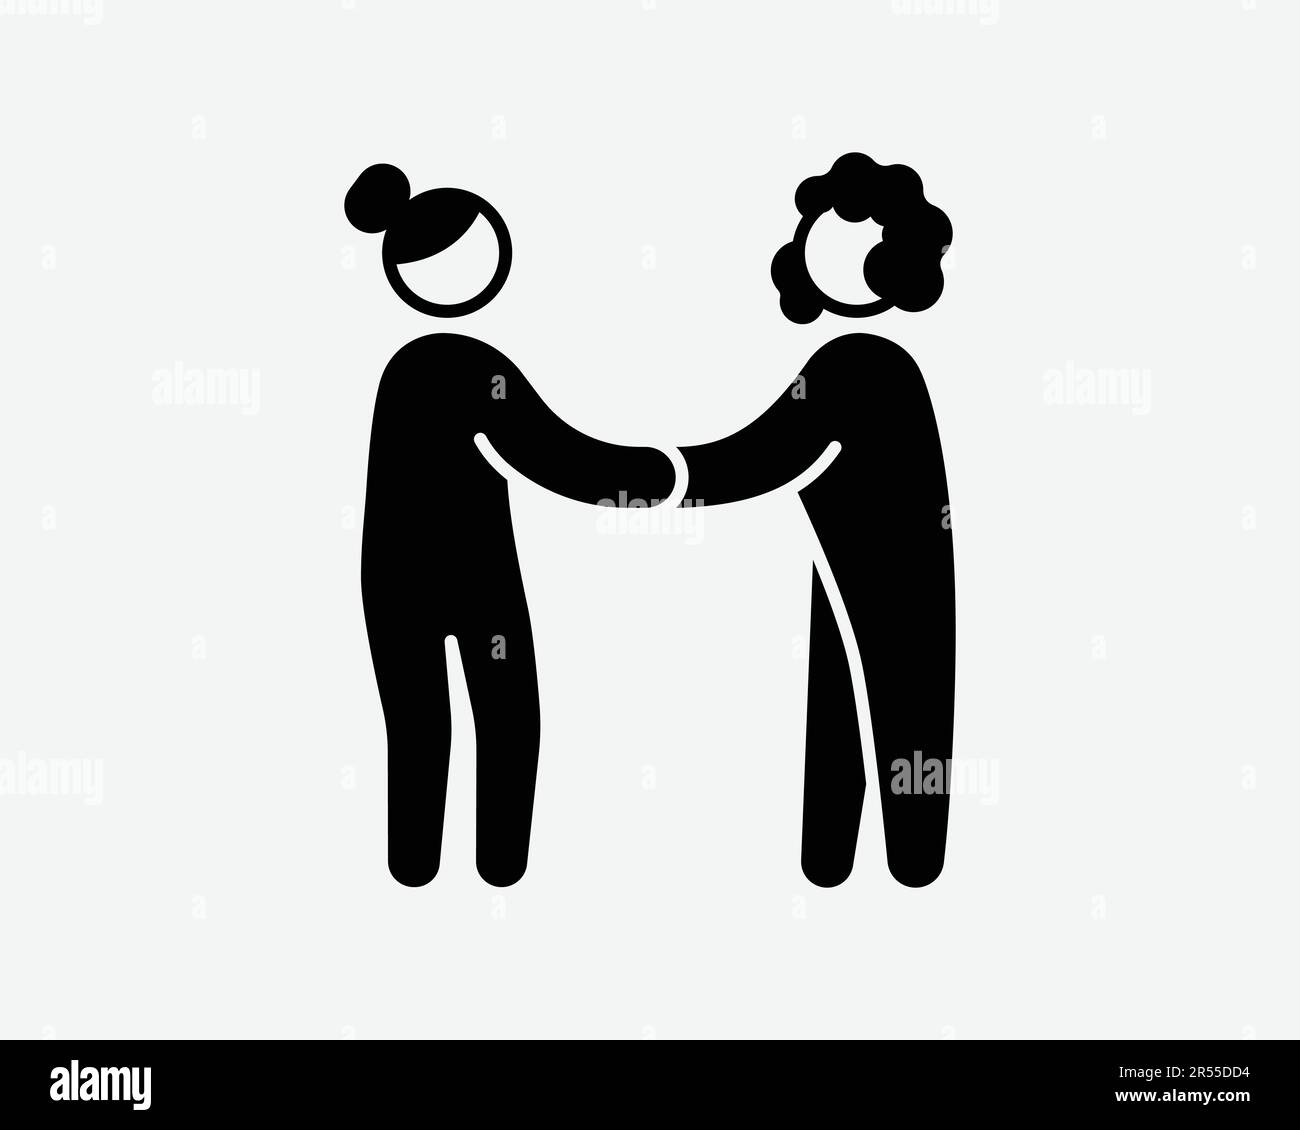 Women Handshake Icon. Agree Loyalty Greeting Greet Contract Partnership Deal Female Sign Symbol Black Artwork Graphic Illustration Clipart EPS Vector Stock Vector